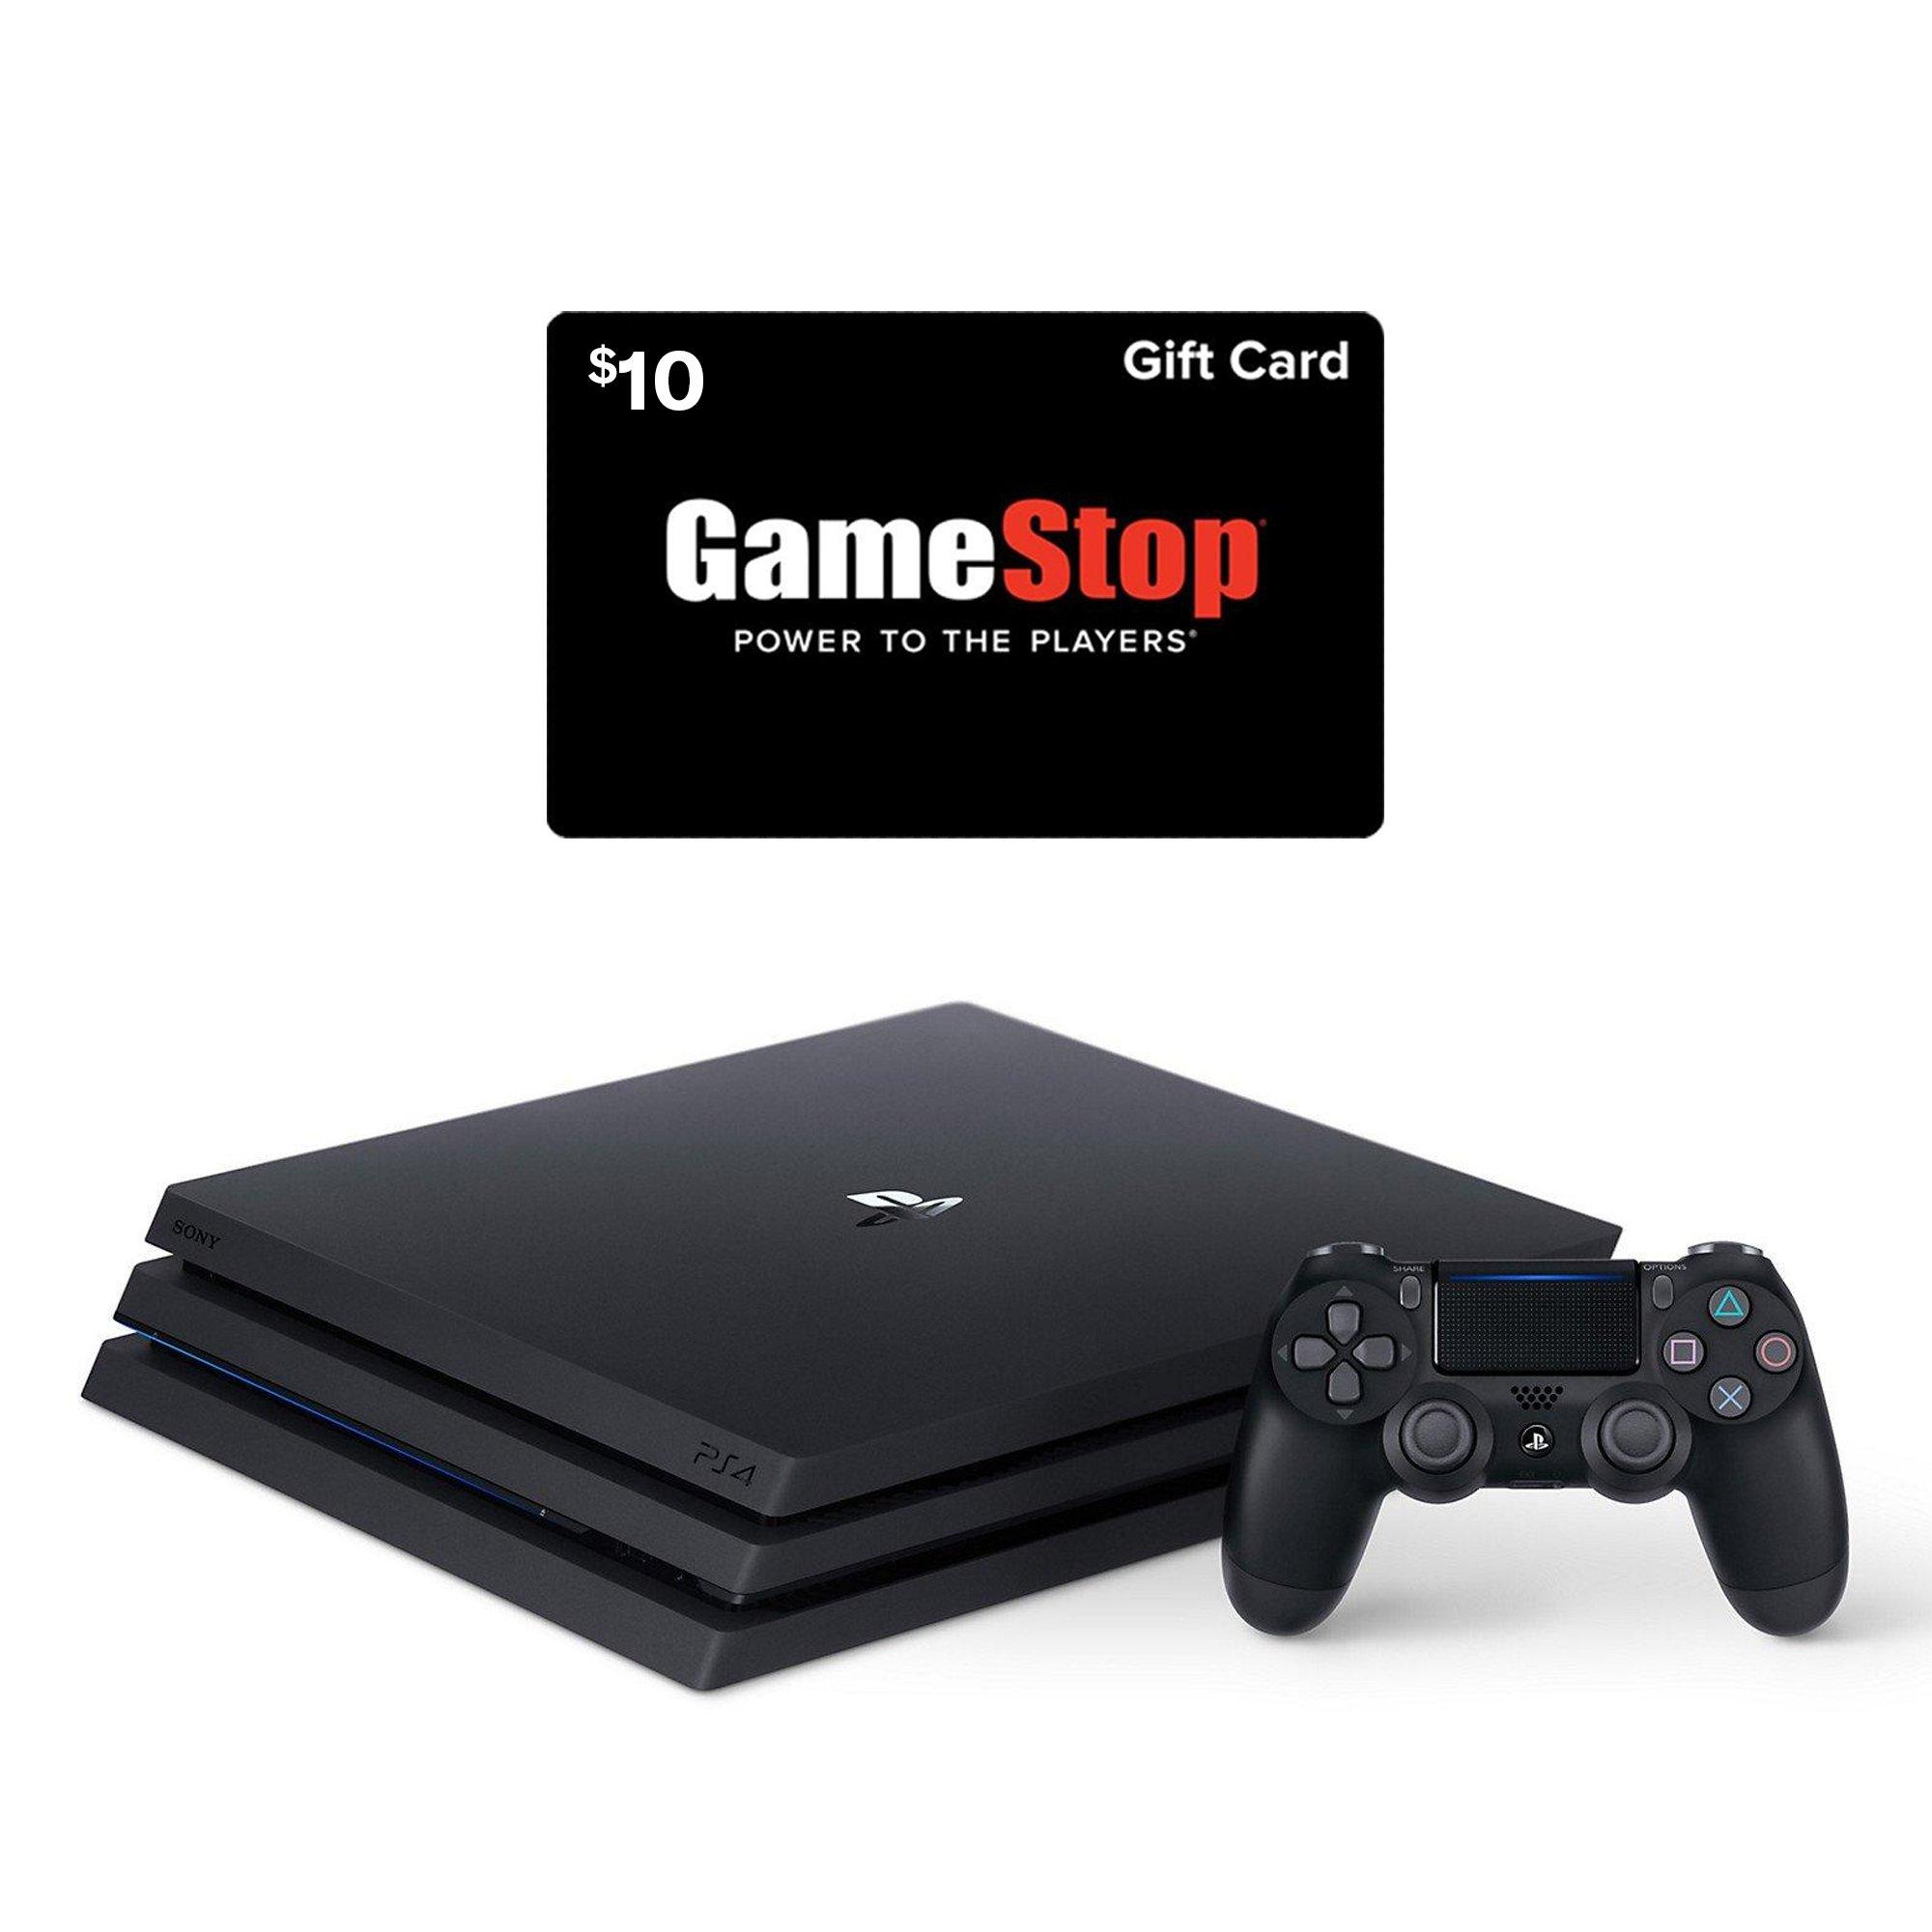 can you buy a psn card with a gamestop gift card